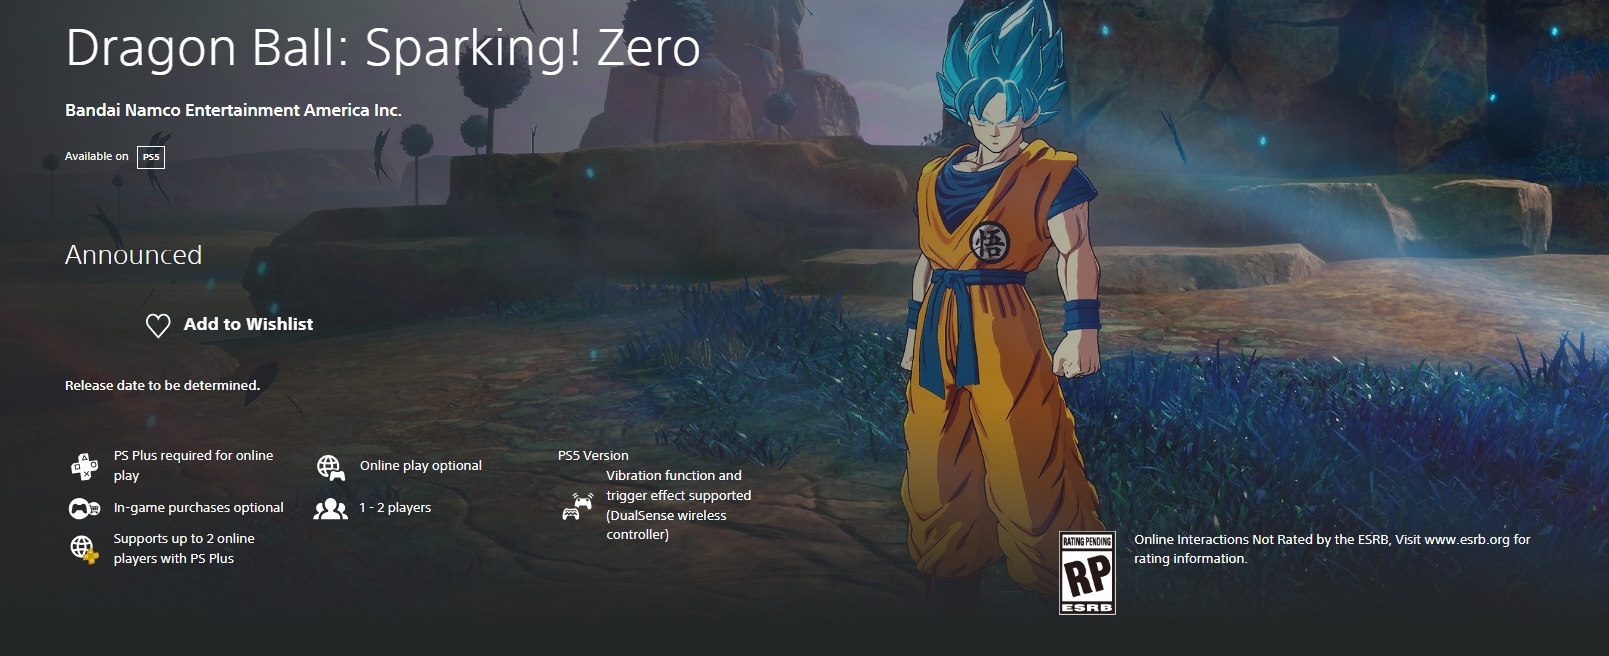 Sony has updated the PS store page for Dragon Ball: Sparking Zero to show a local multiplayer mode | Image Source: PlayStation Store